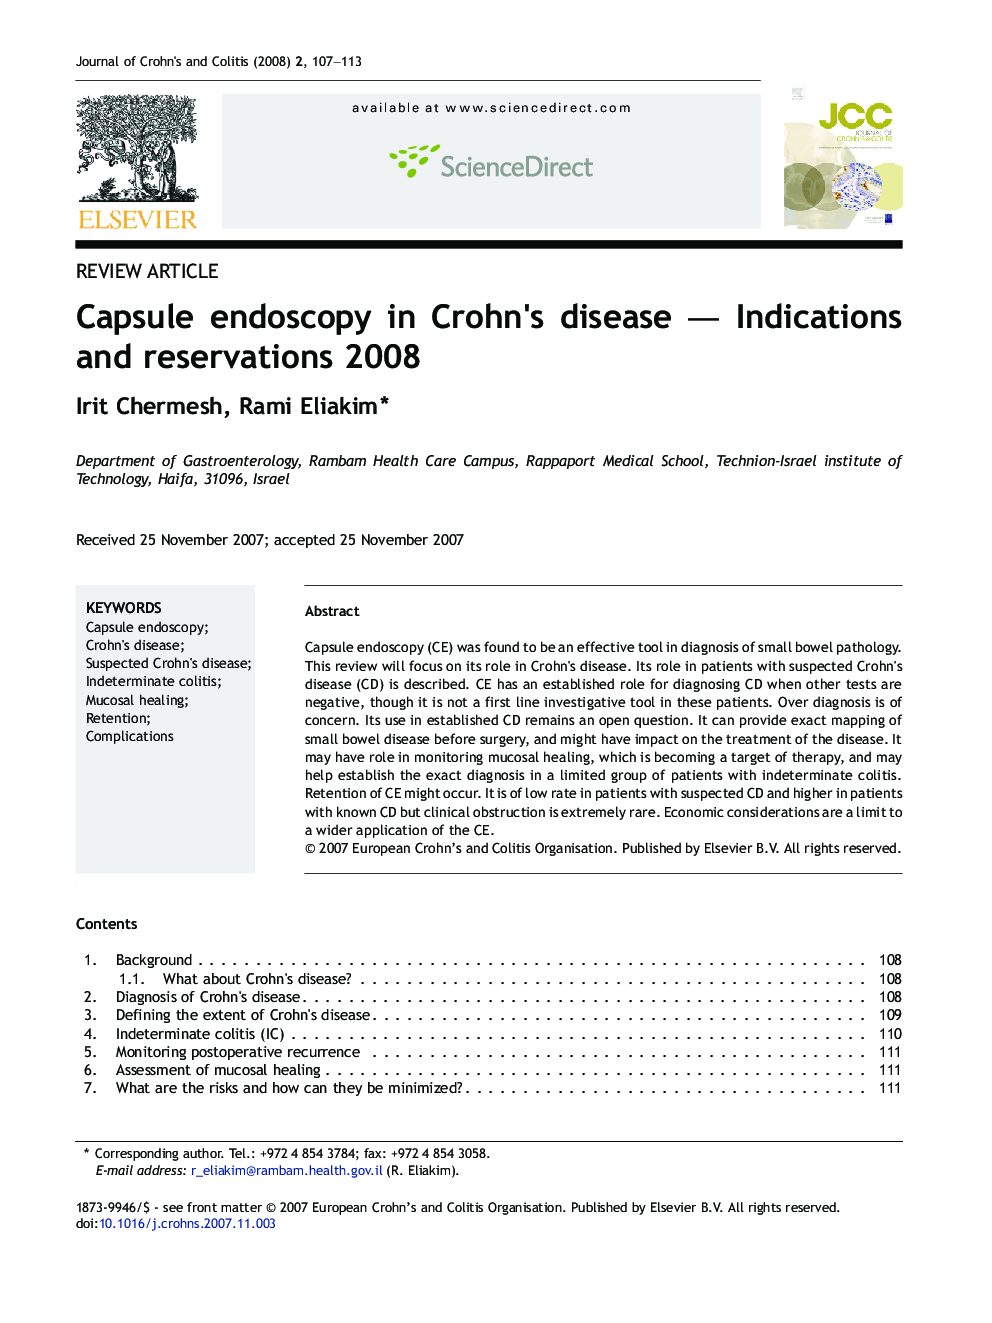 Review ArticleCapsule endoscopy in Crohn's disease - Indications and reservations 2008